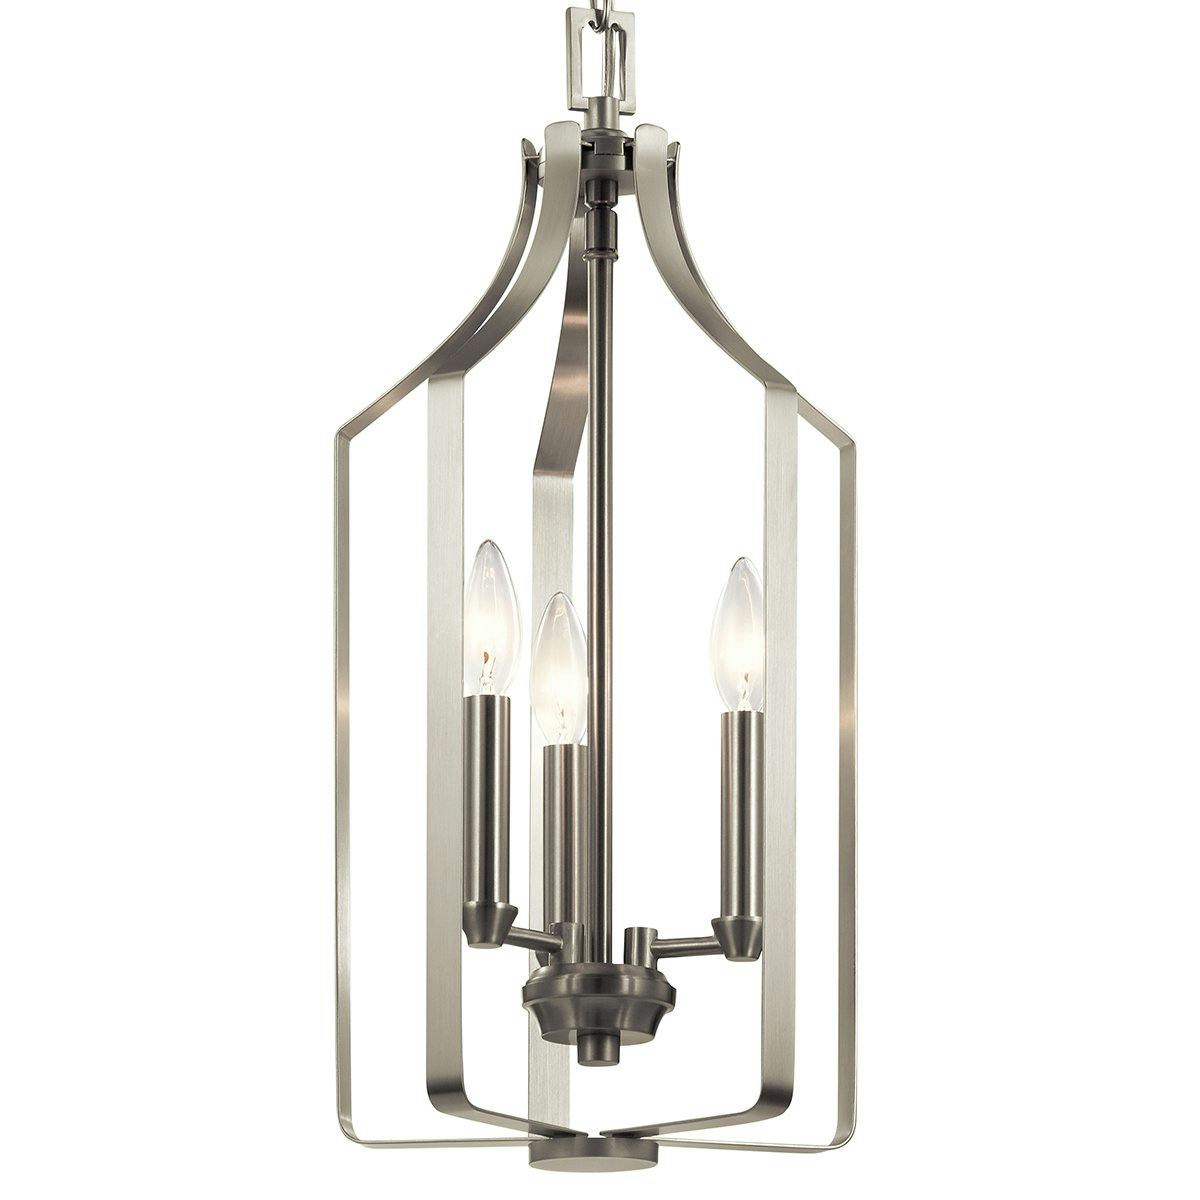 Close up view of the Morrigan 21" 3 Light Foyer Pendant Nickel on a white background